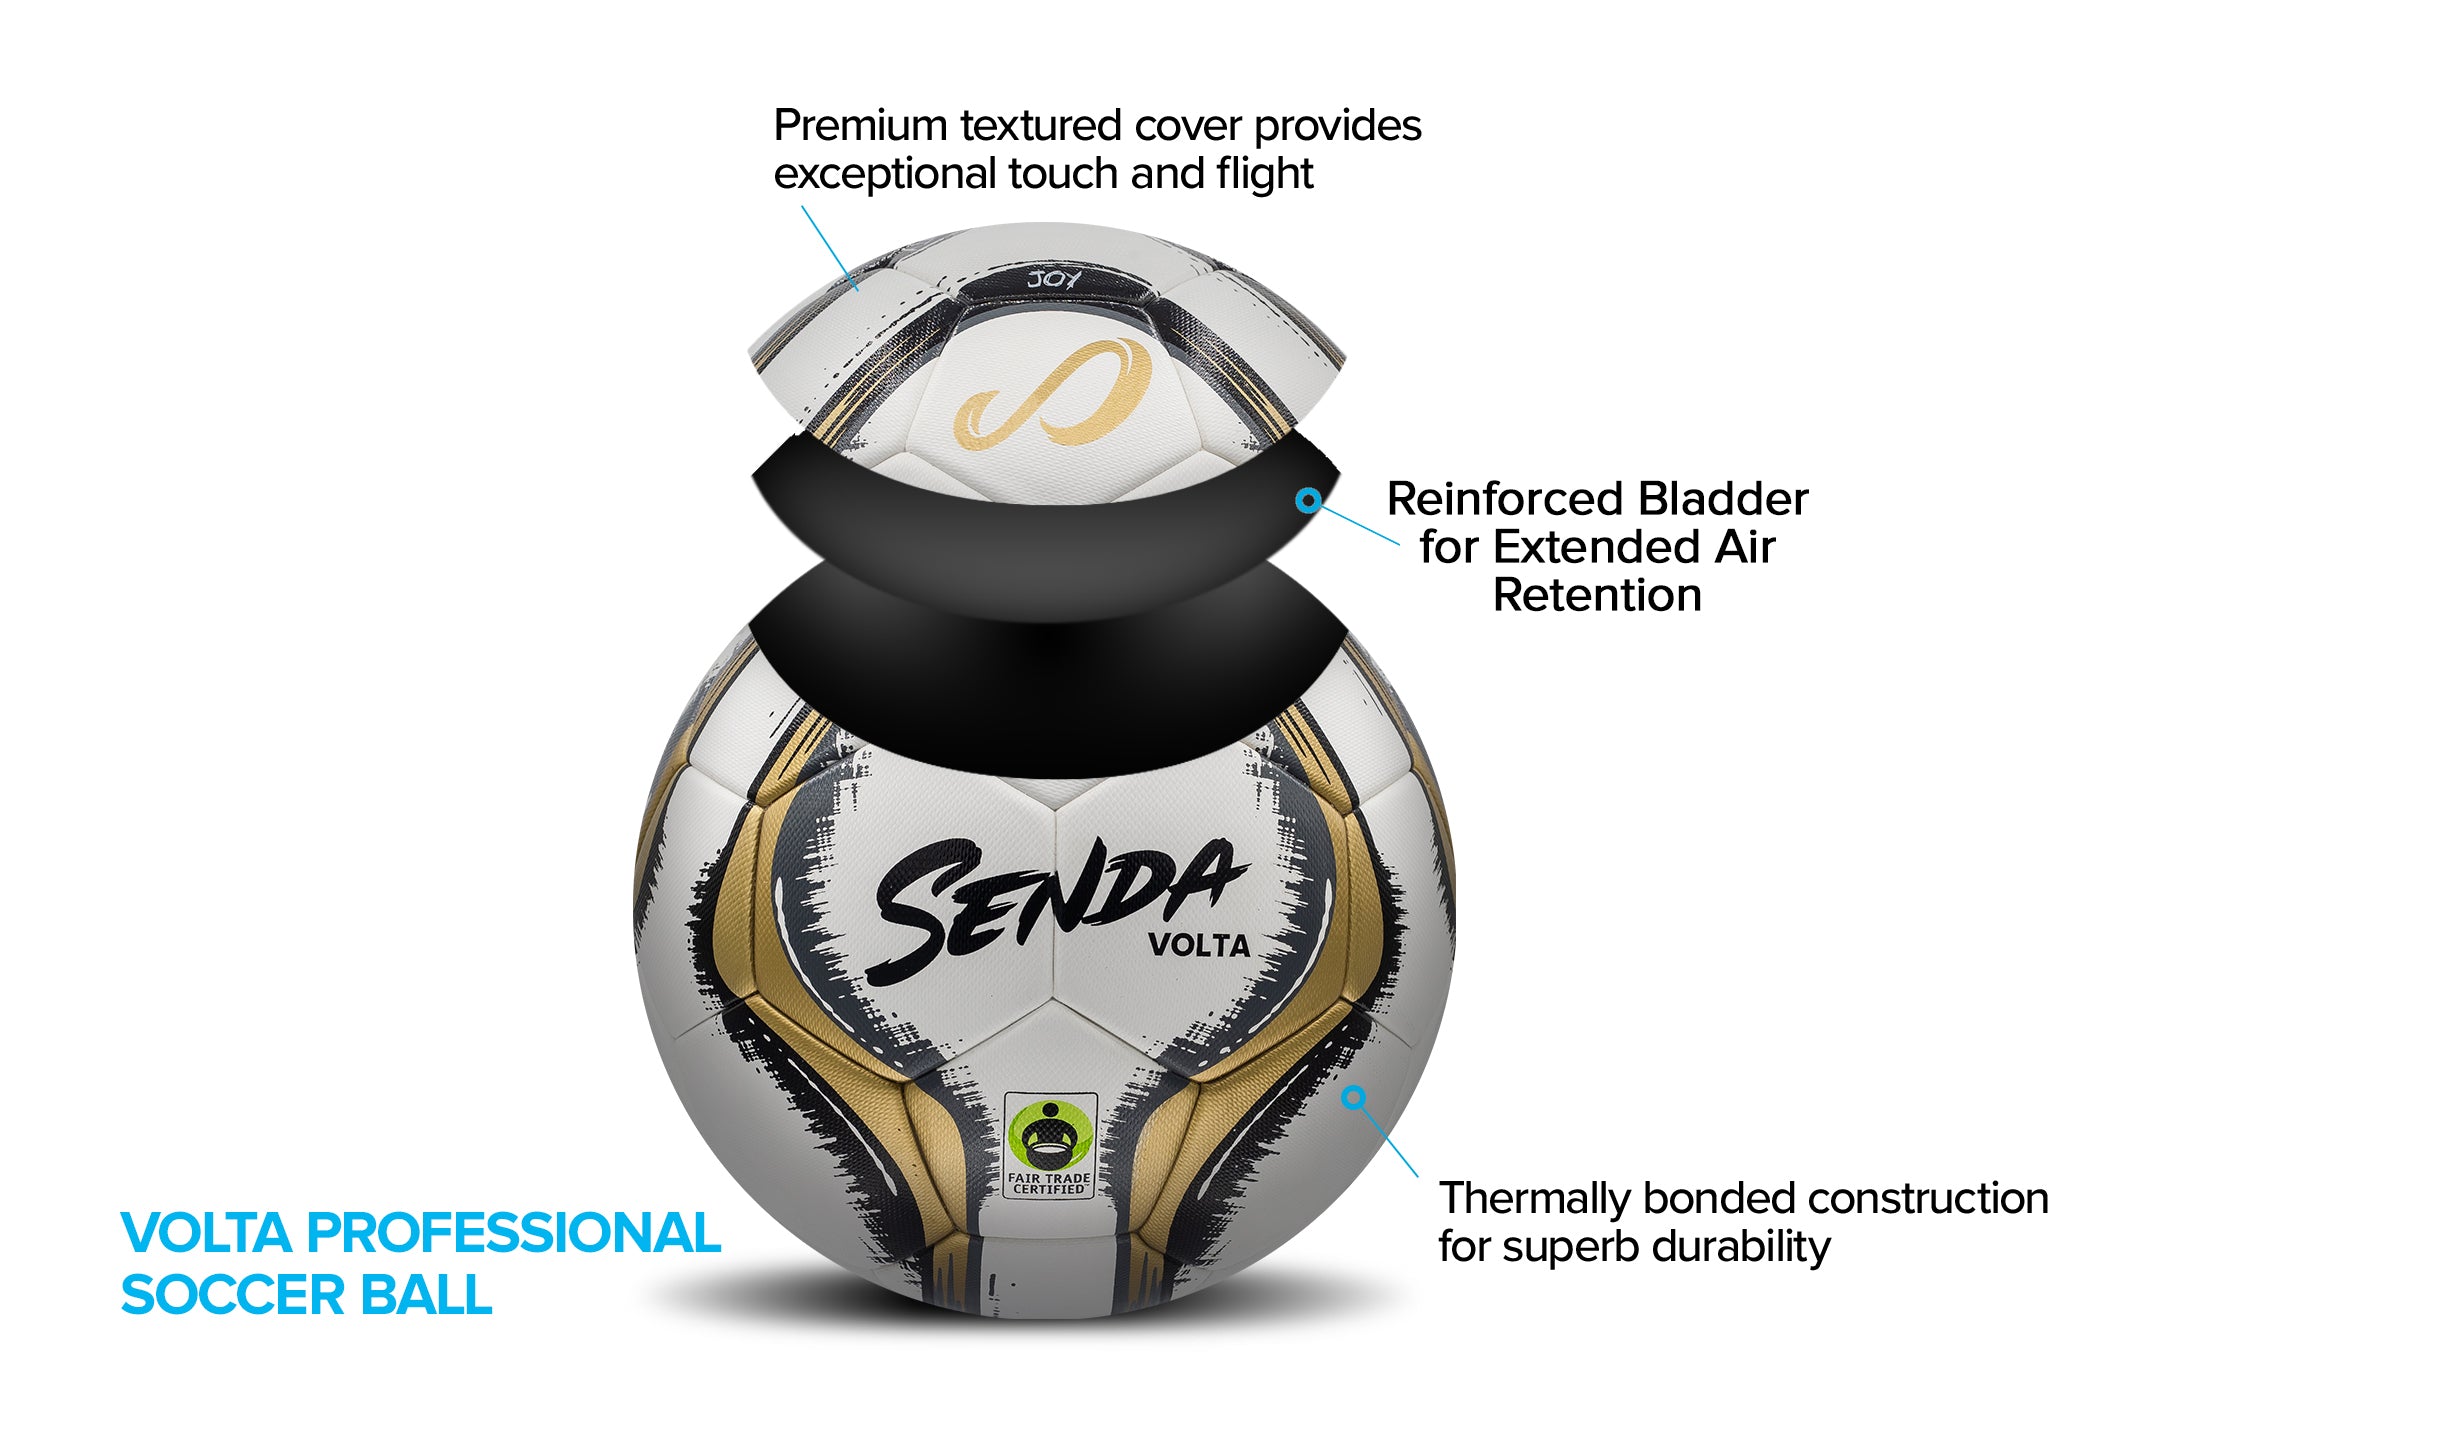 Senda Volta Professional Football Ball - Buy now online with Free delivery in 1-2 days in UAE, Dubai, Abu-Dhabi. 